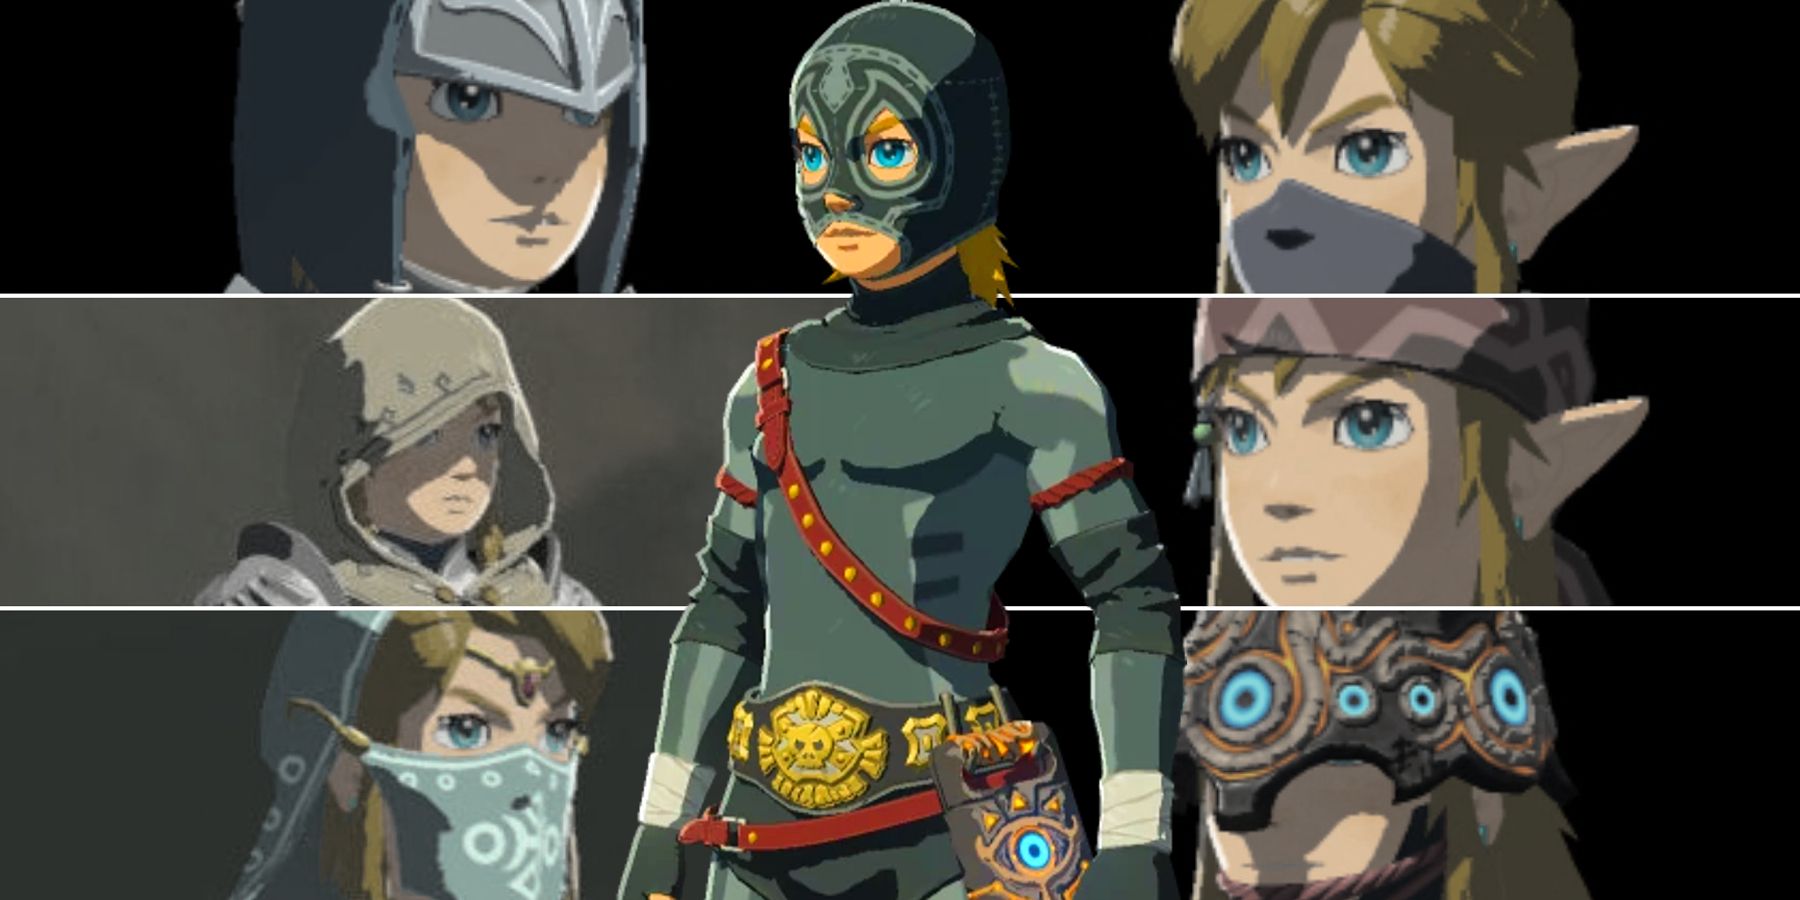 Every Legend Of Zelda: Breath Of The Wild Costume, Ranked From Worst To Best